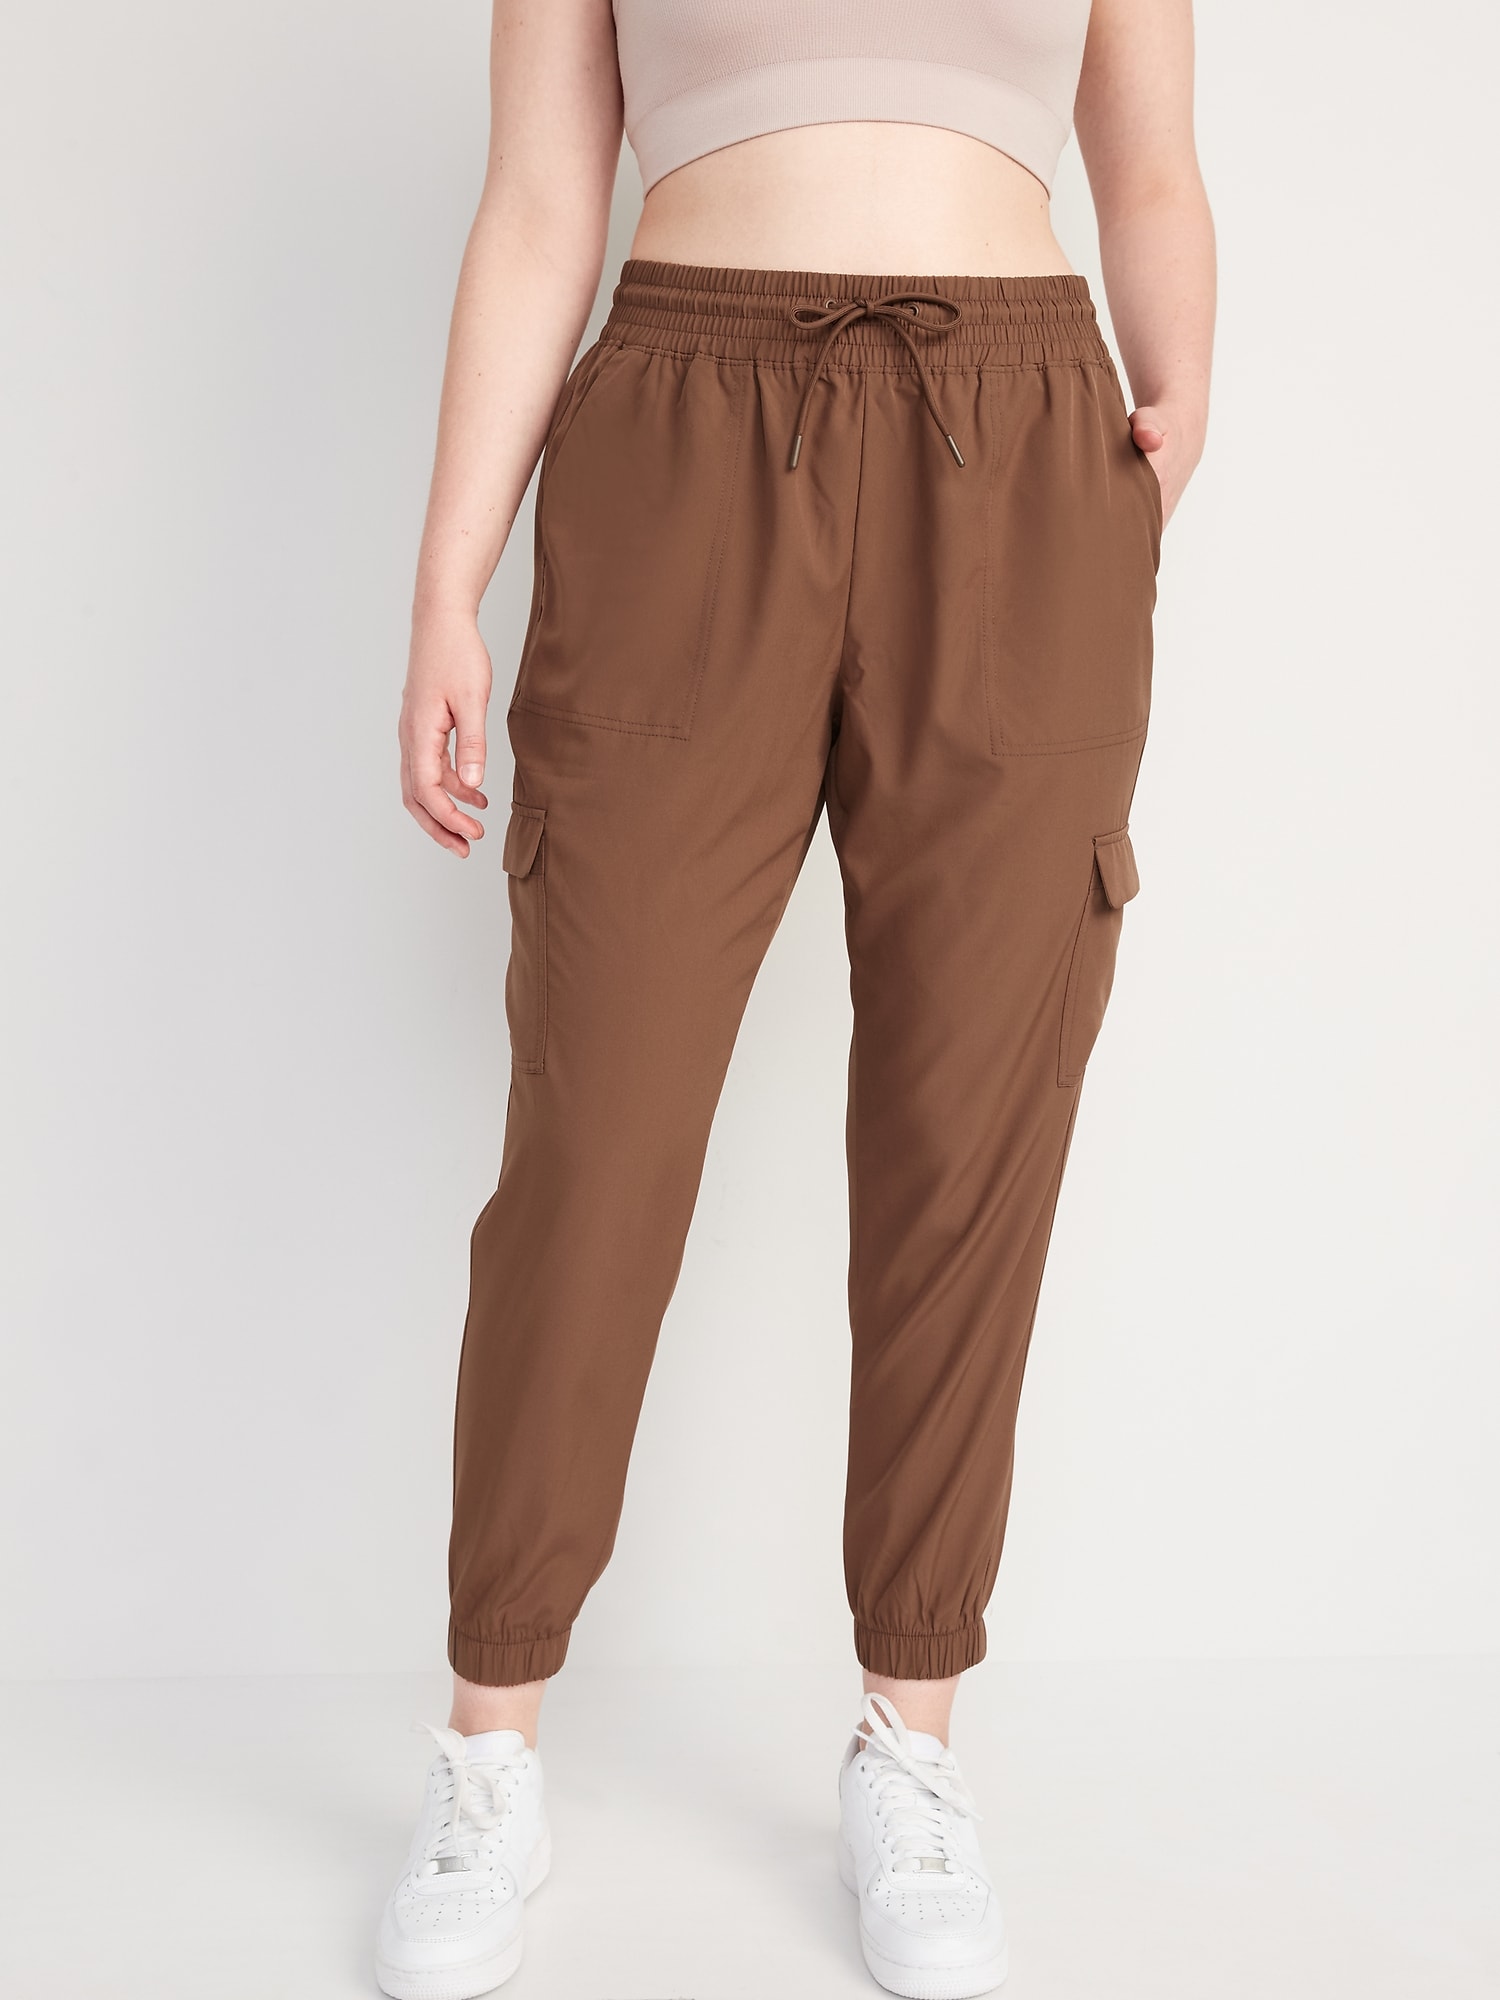 High-Waisted StretchTech Cargo Jogger Pants for Women | Old Navy